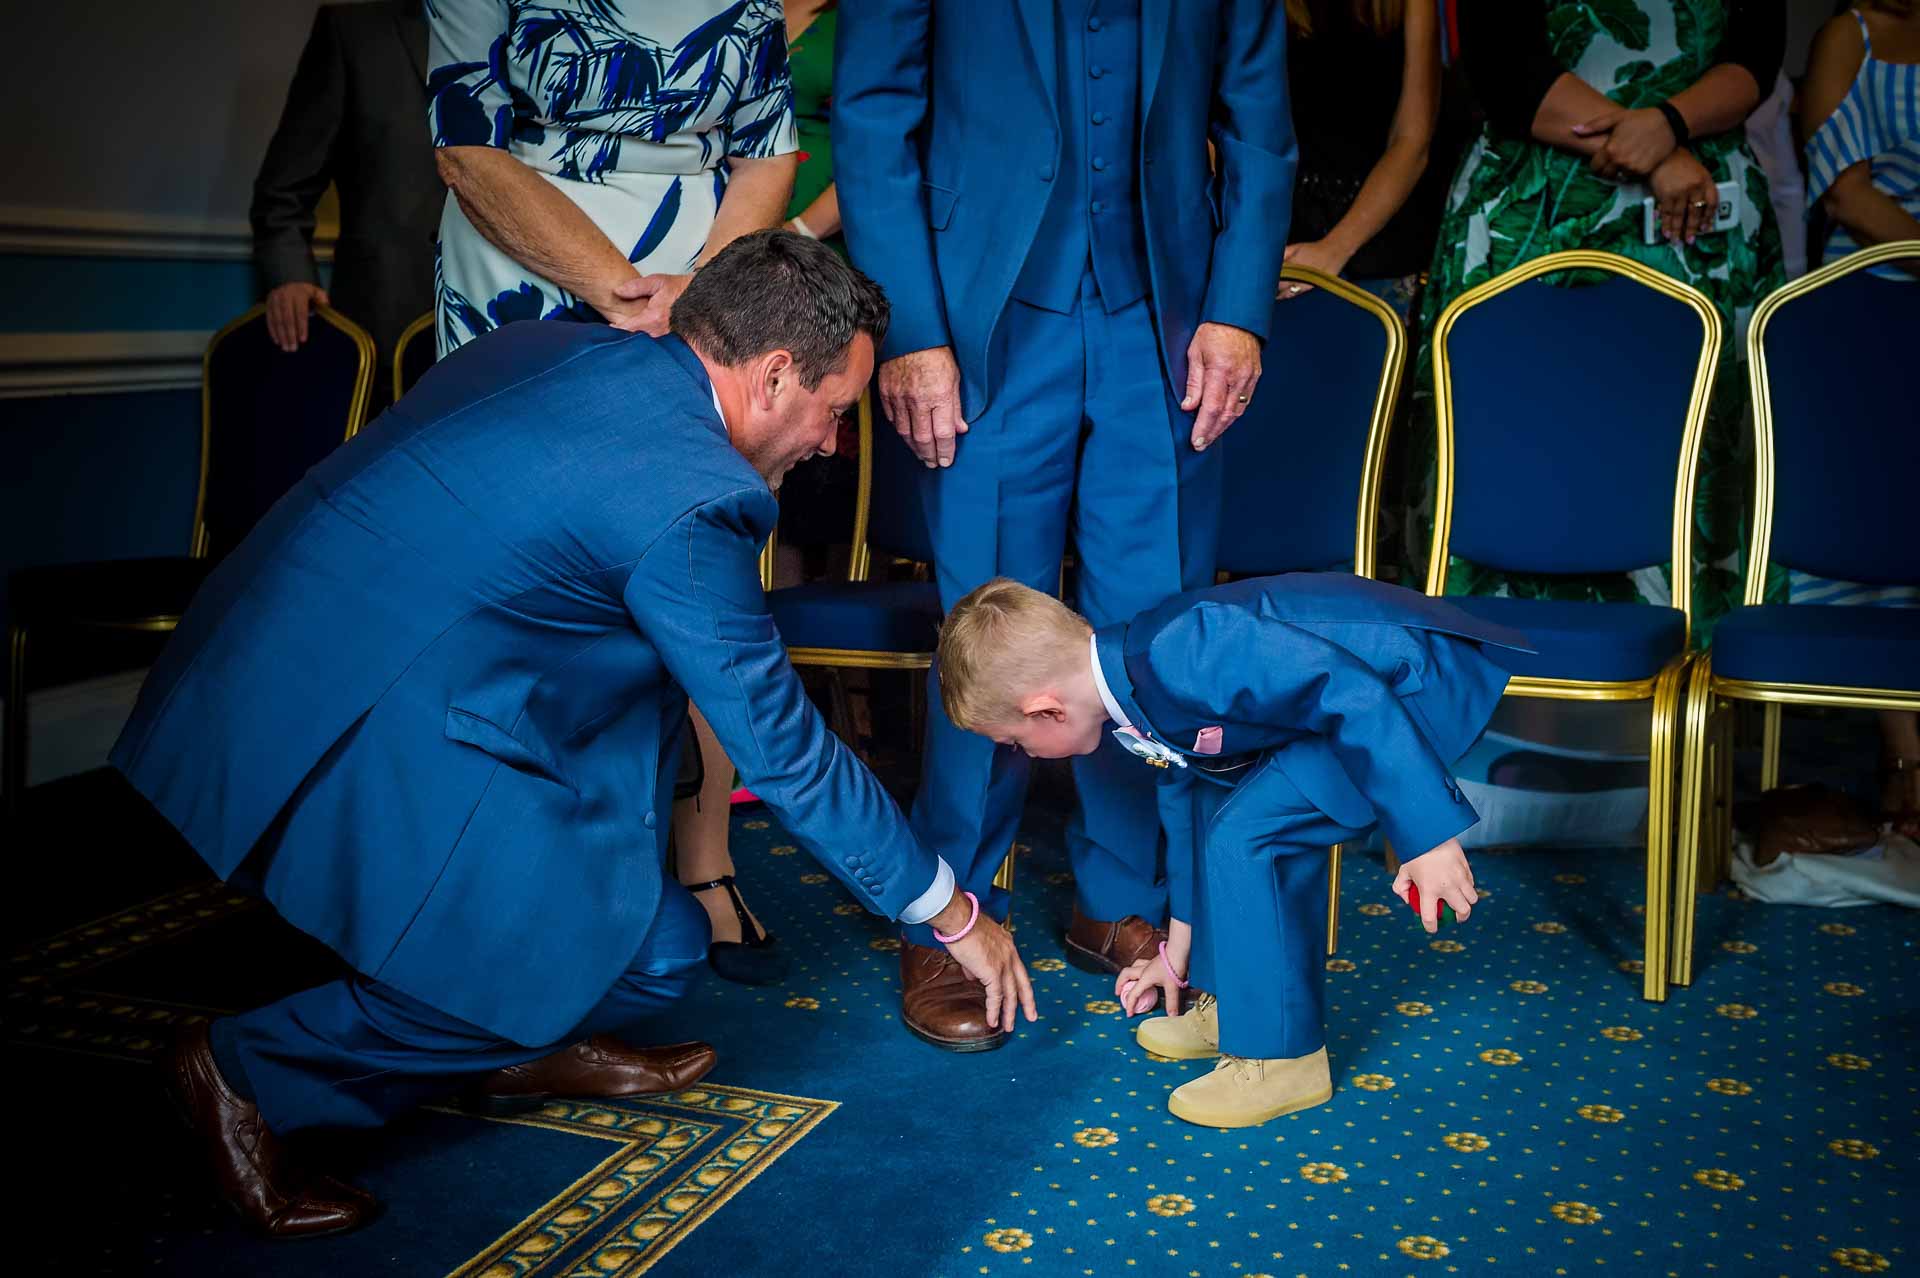 Boy and man picking up dropped rings in Cardiff City Hall wedding